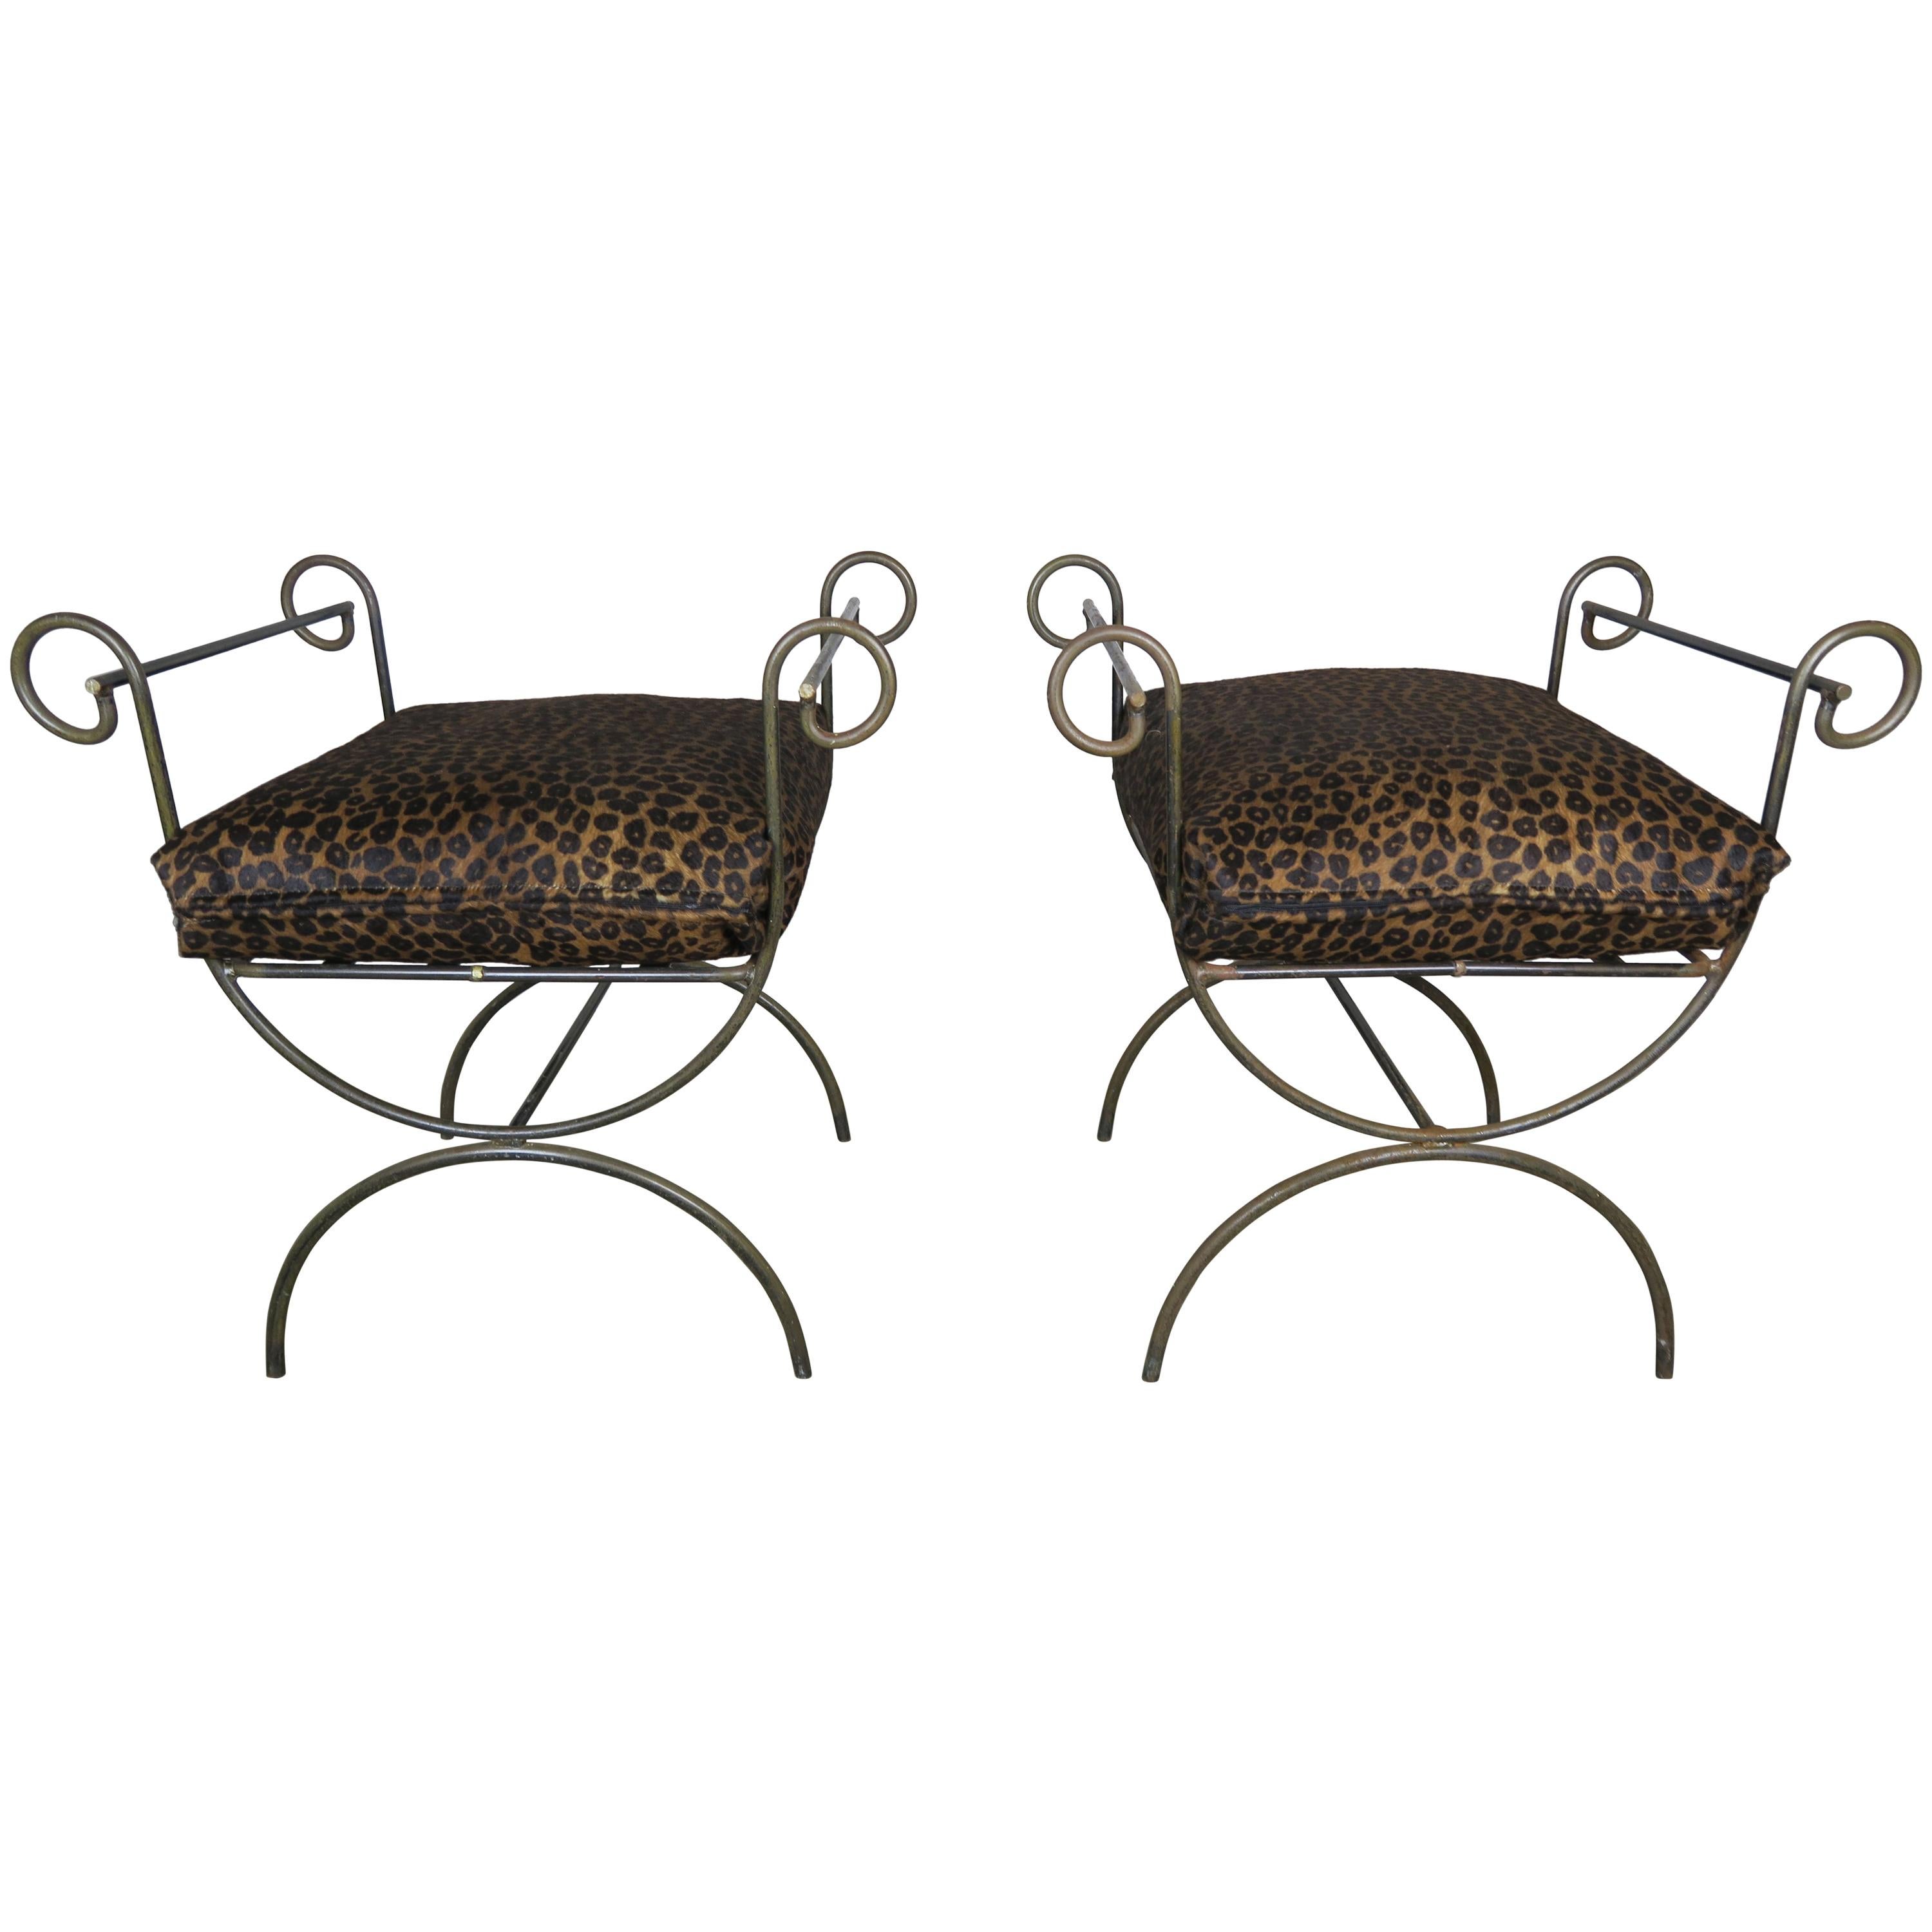 Pair of Wrought Iron Benches with Leopard Style Cushions